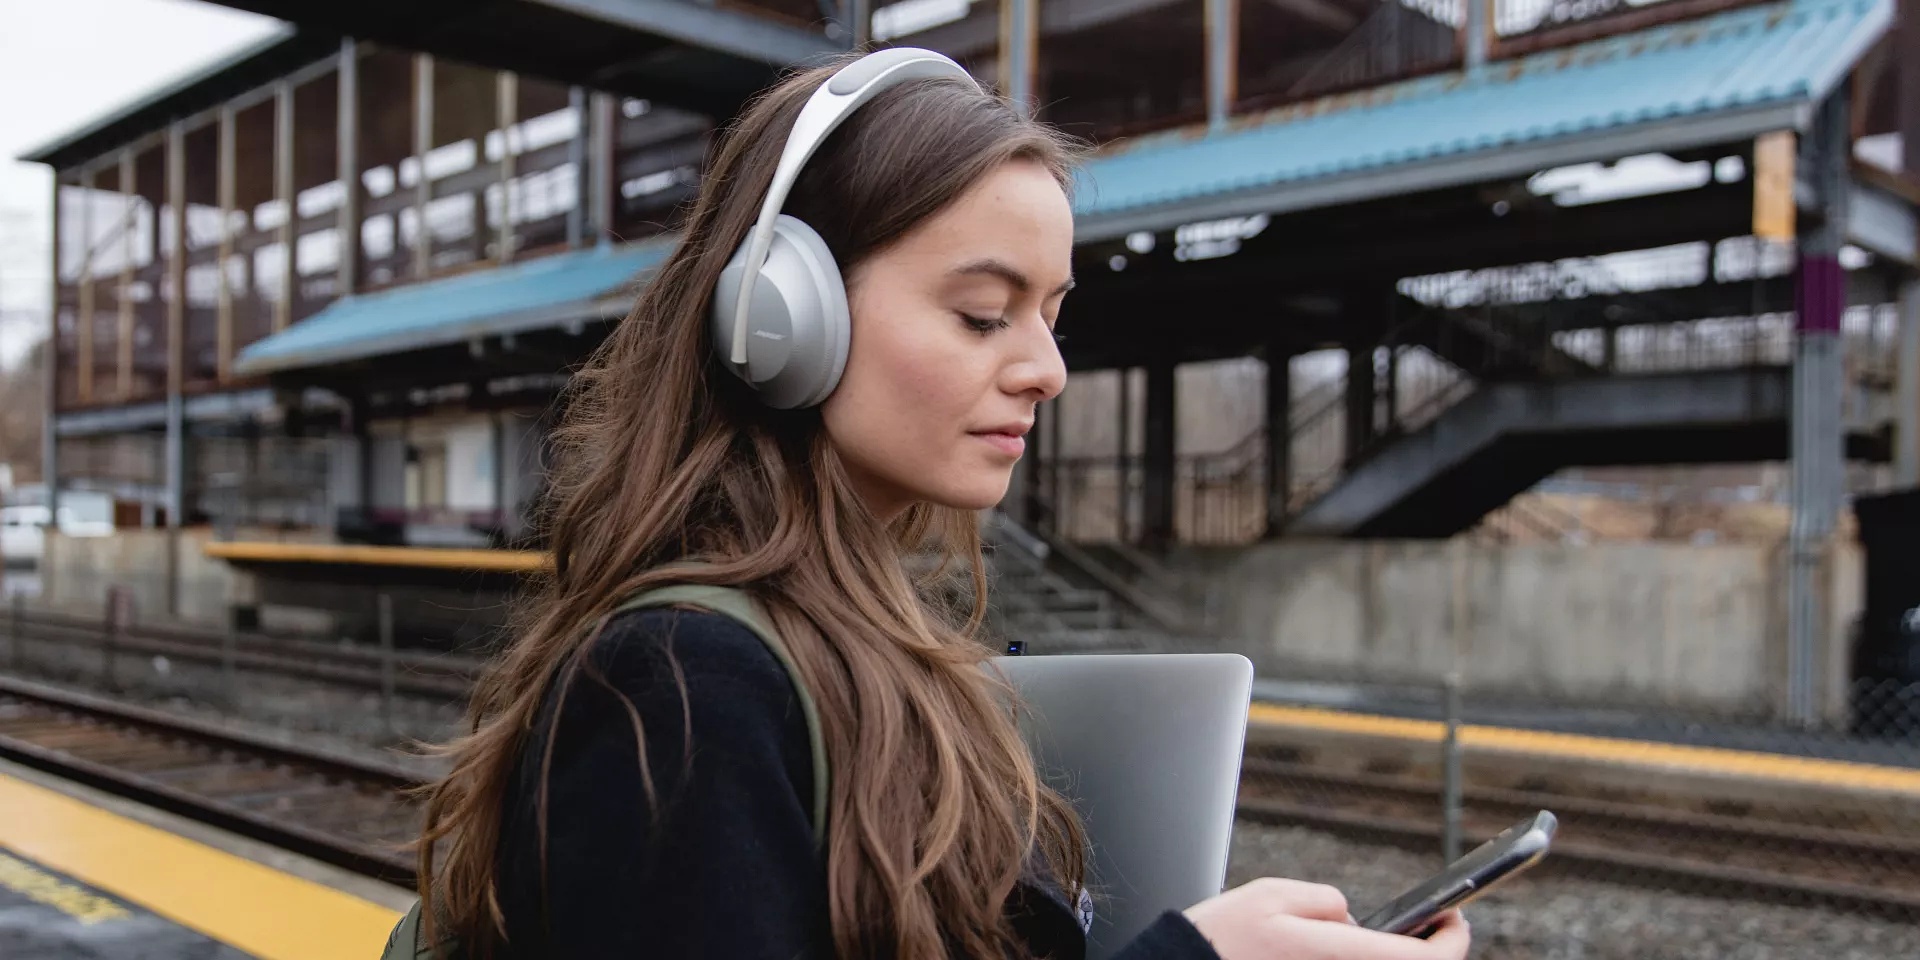 Woman waiting for train and fixing Noise Cancelling Headphones 700 app issue